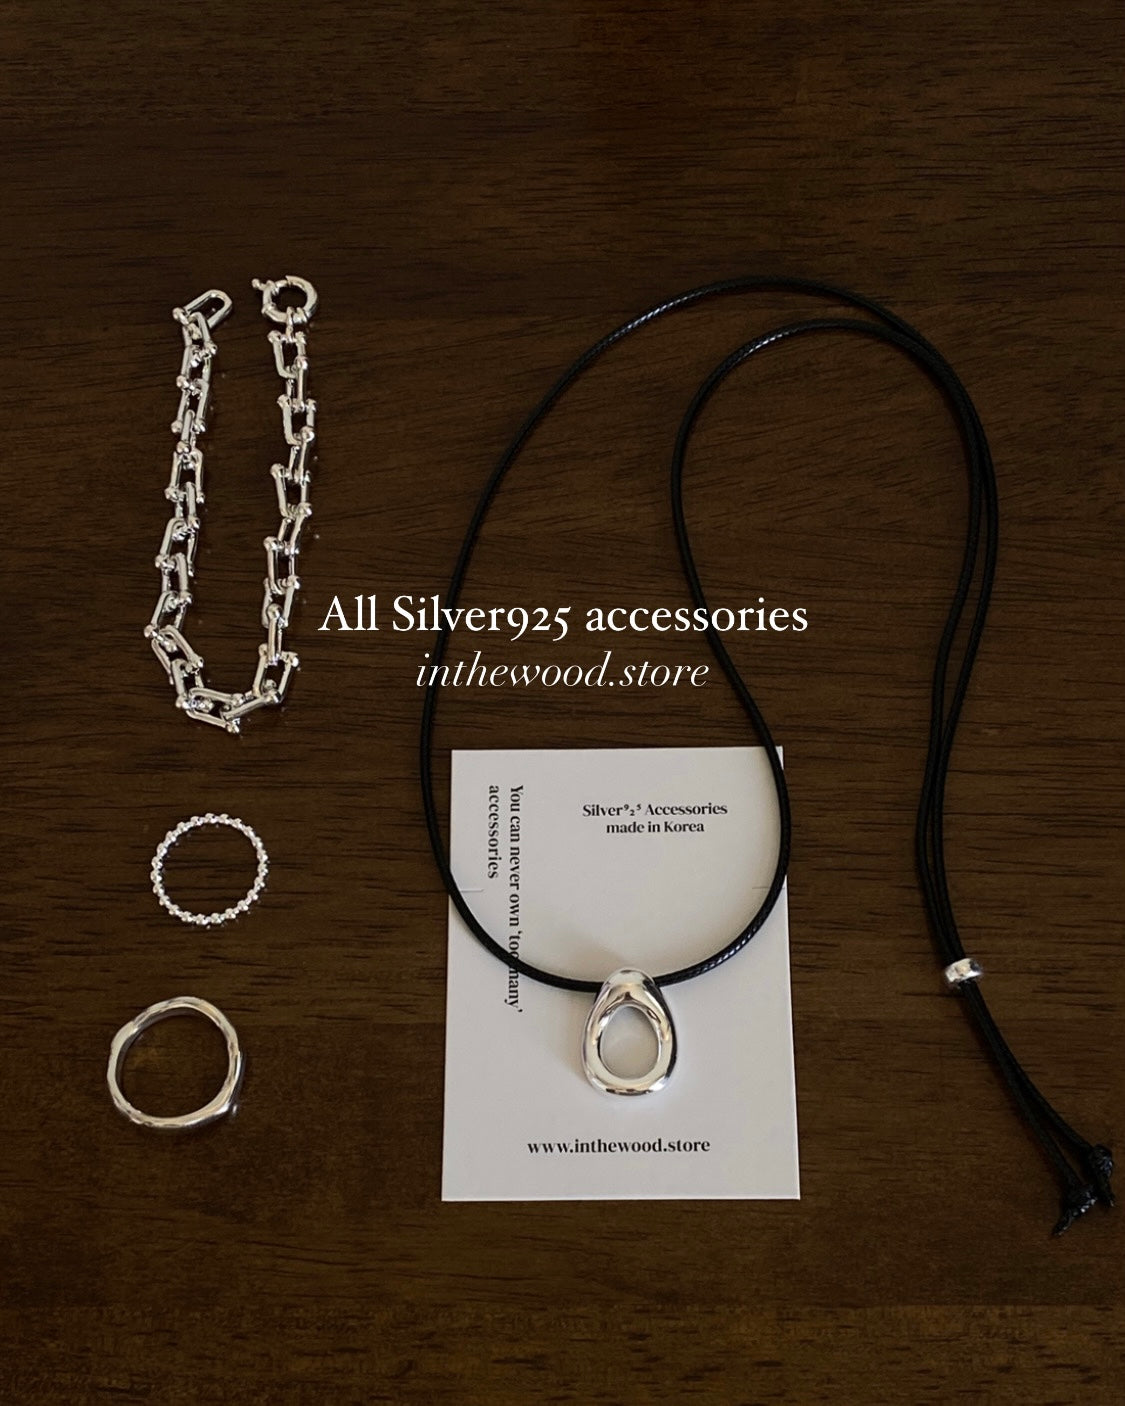 [925silver] Oval Black Rope Necklace